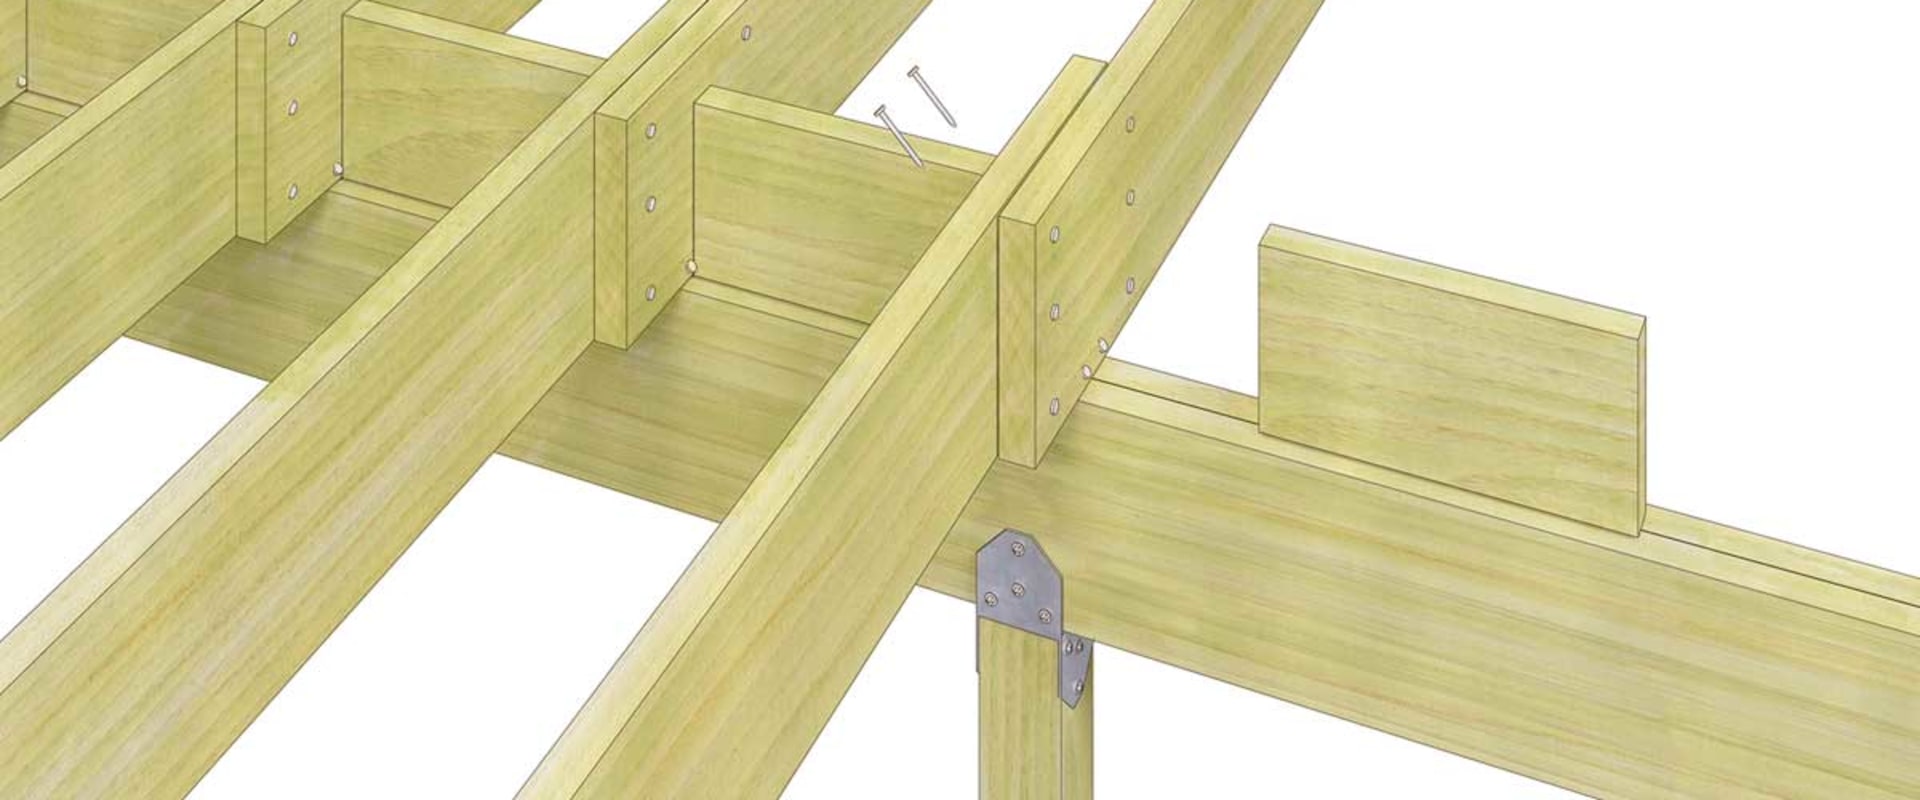 How Much Space Should be Left Between Joists During Deck Construction?